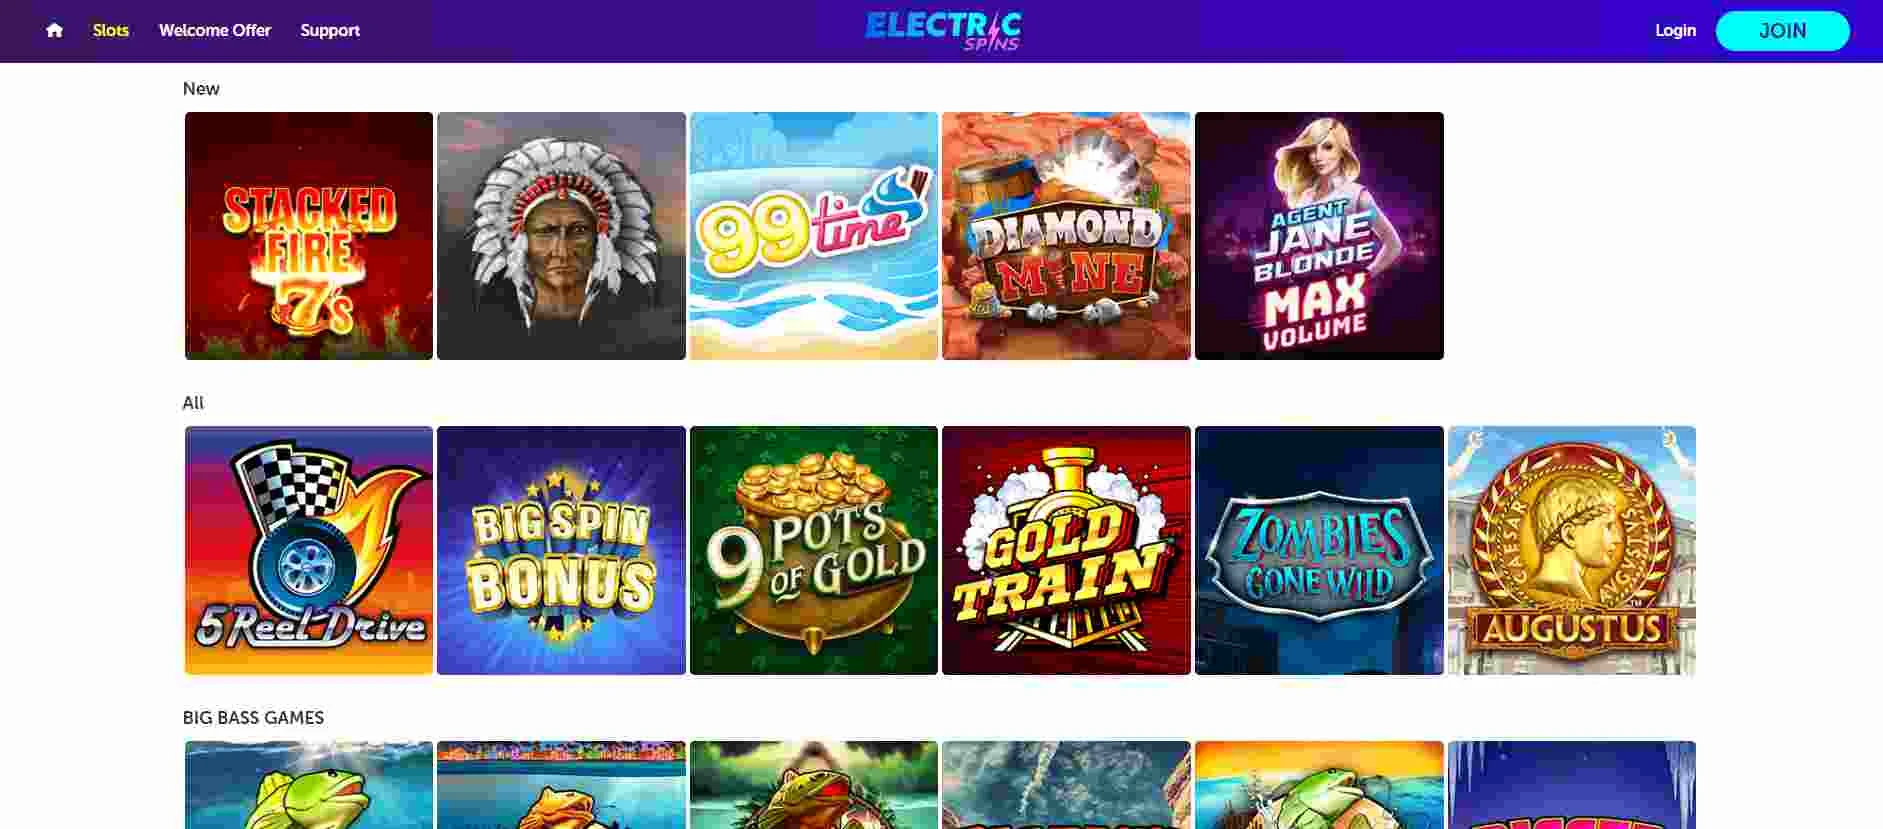 Electric Spins Casino - New, Jackpot and Big Bass Slot Games